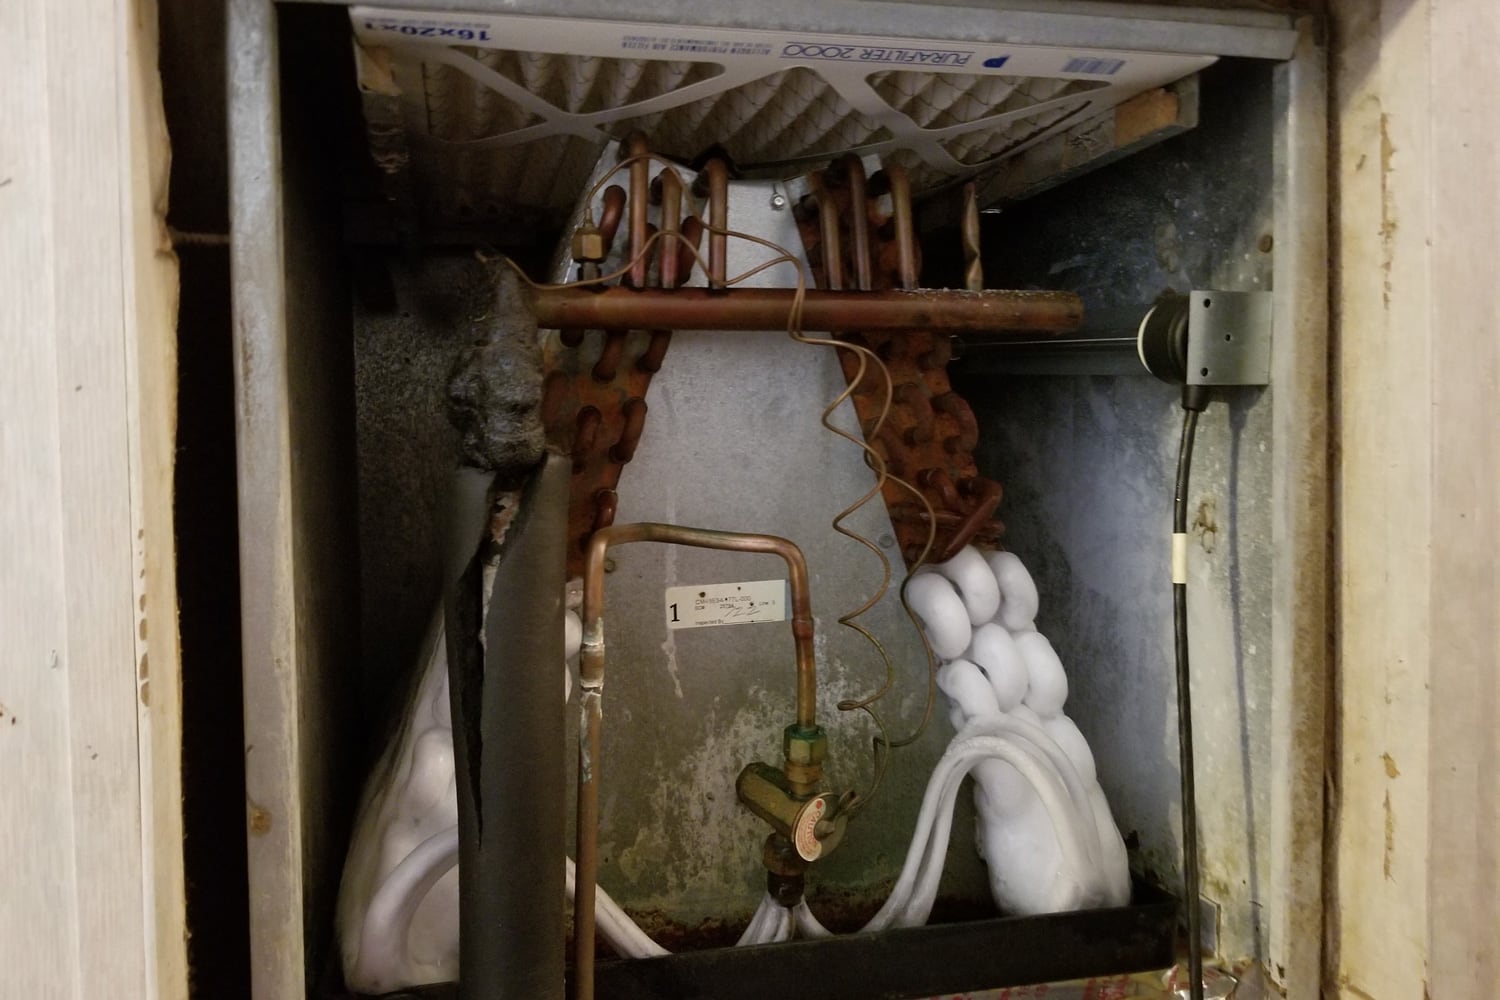  Frozen and rusted Evaporator coil found during Inspection.